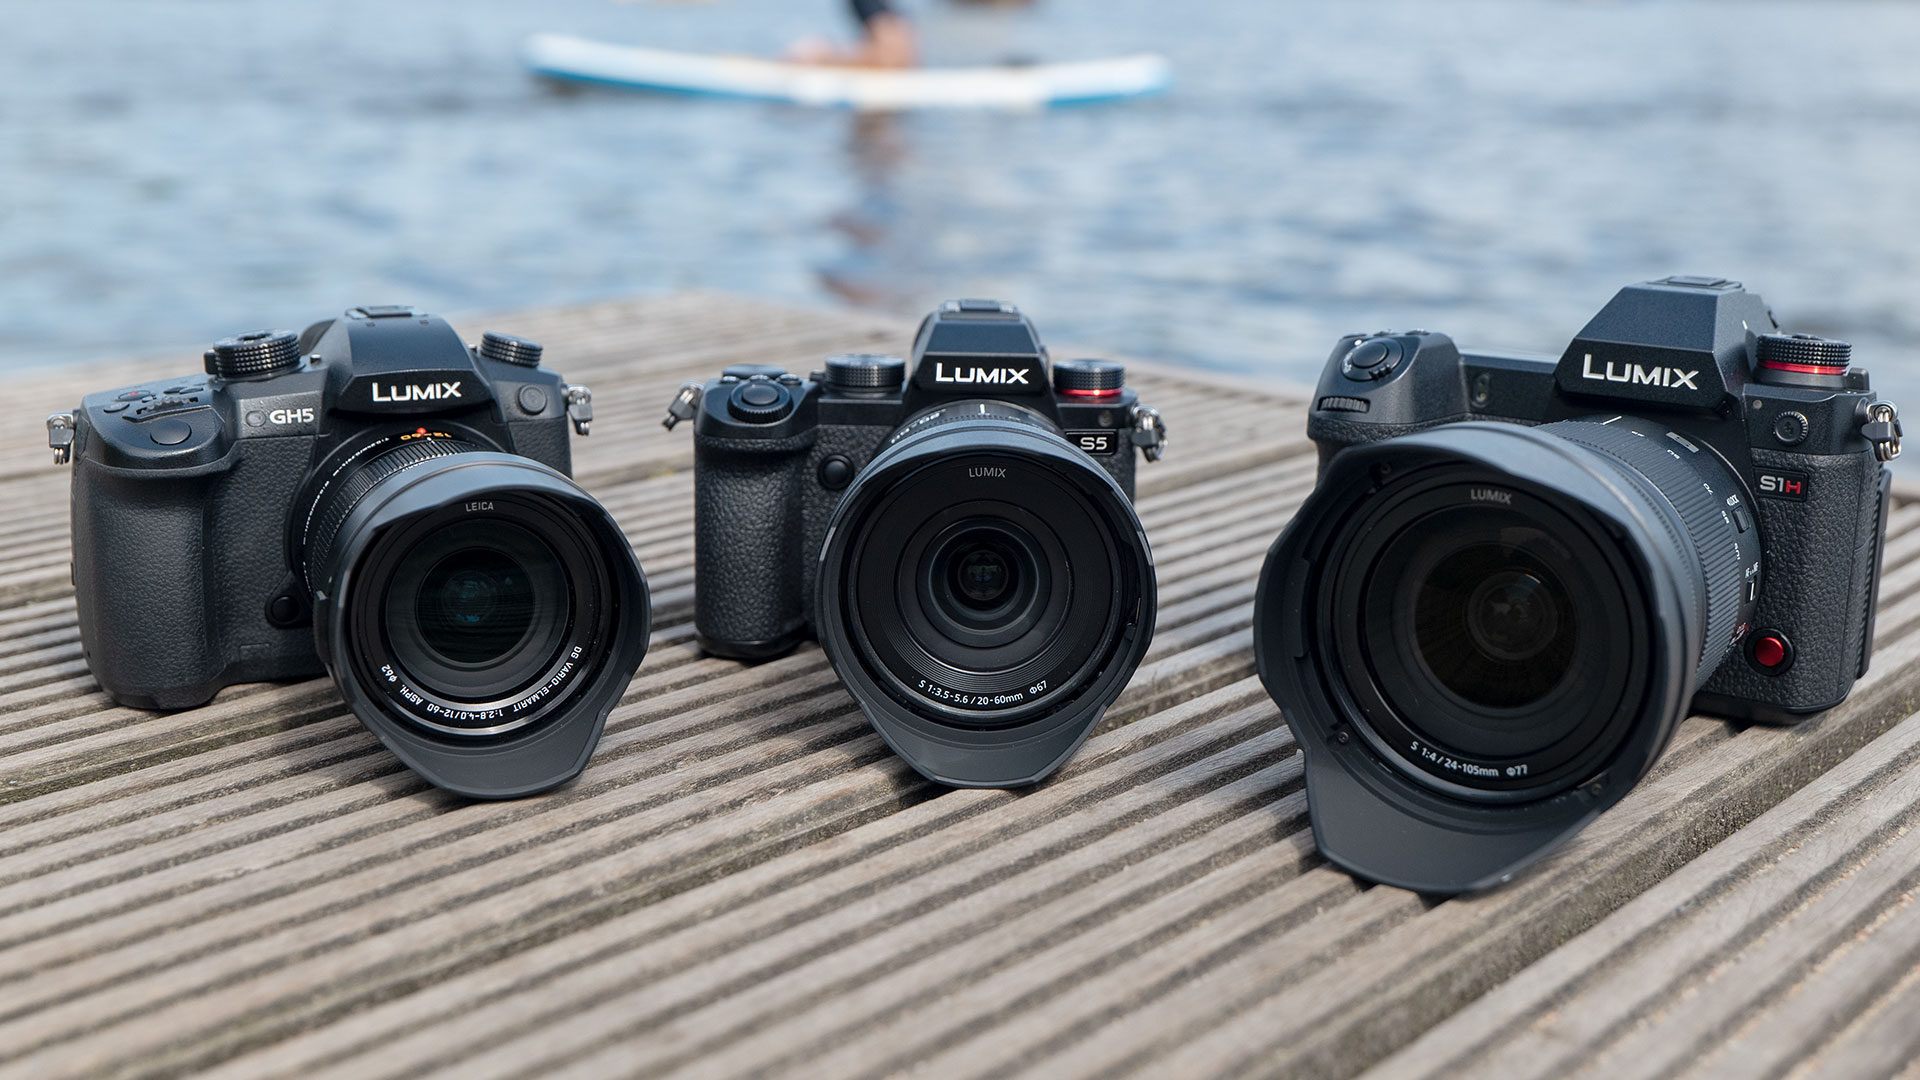 Here's how the S5 compares in size against the GH5 (left) and the S1H (right). (Image: Panasonic)